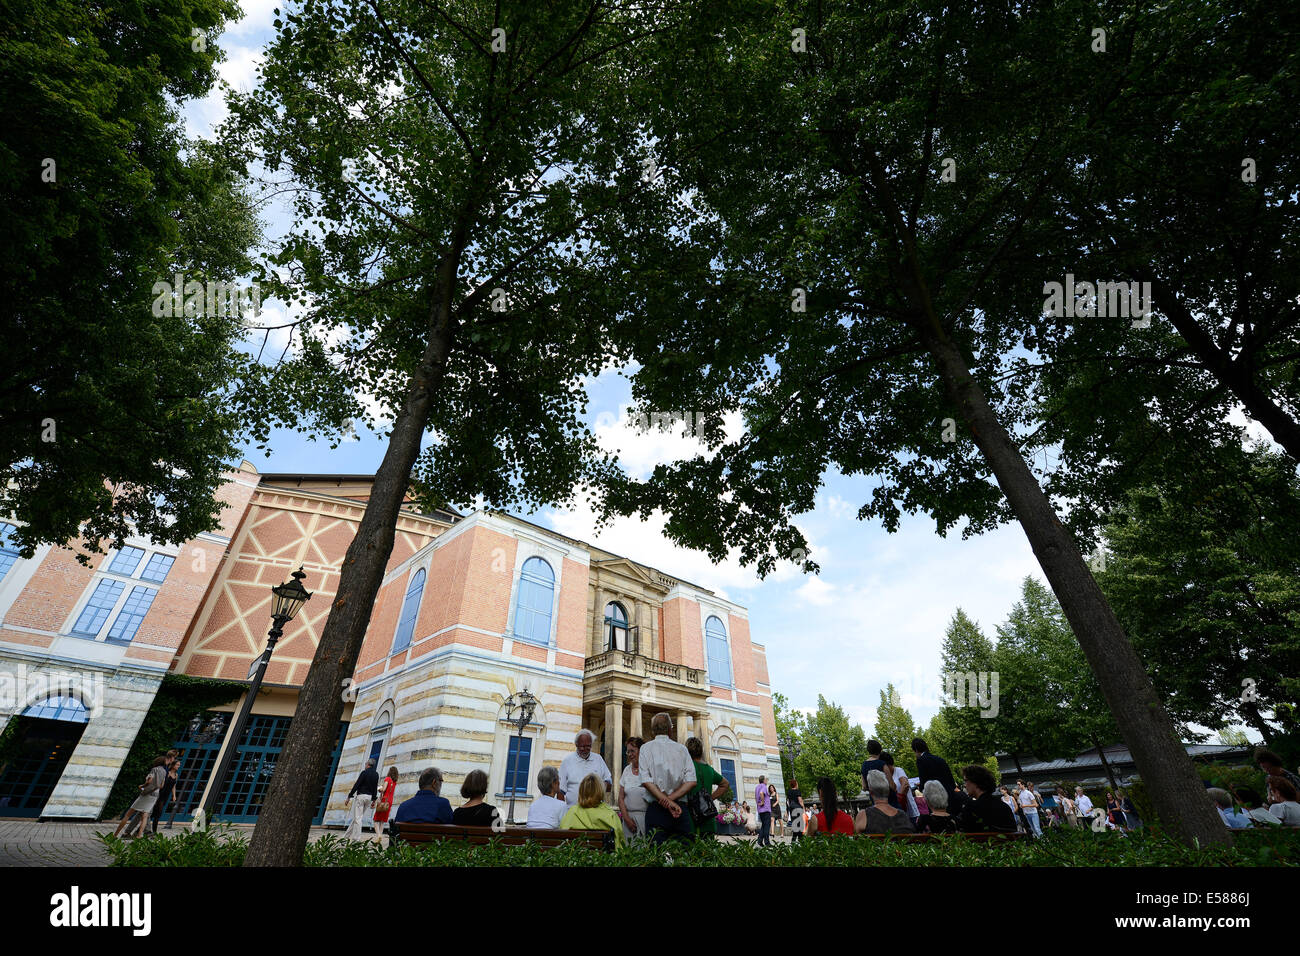 Bayreuth, Germany. 22nd July, 2014. Guests of the final rehearsal stand on Richard-Wagner square in front of the Bayreuth Festival Theatre in Bayreuth, Germany, 22 July 2014. Last year the festival presented a new production of 'Der Ring des Nibelungen' (The Ring of the Nibelung) which will run again this year. Photo: DAVID EBENER/dpa/Alamy Live News Stock Photo